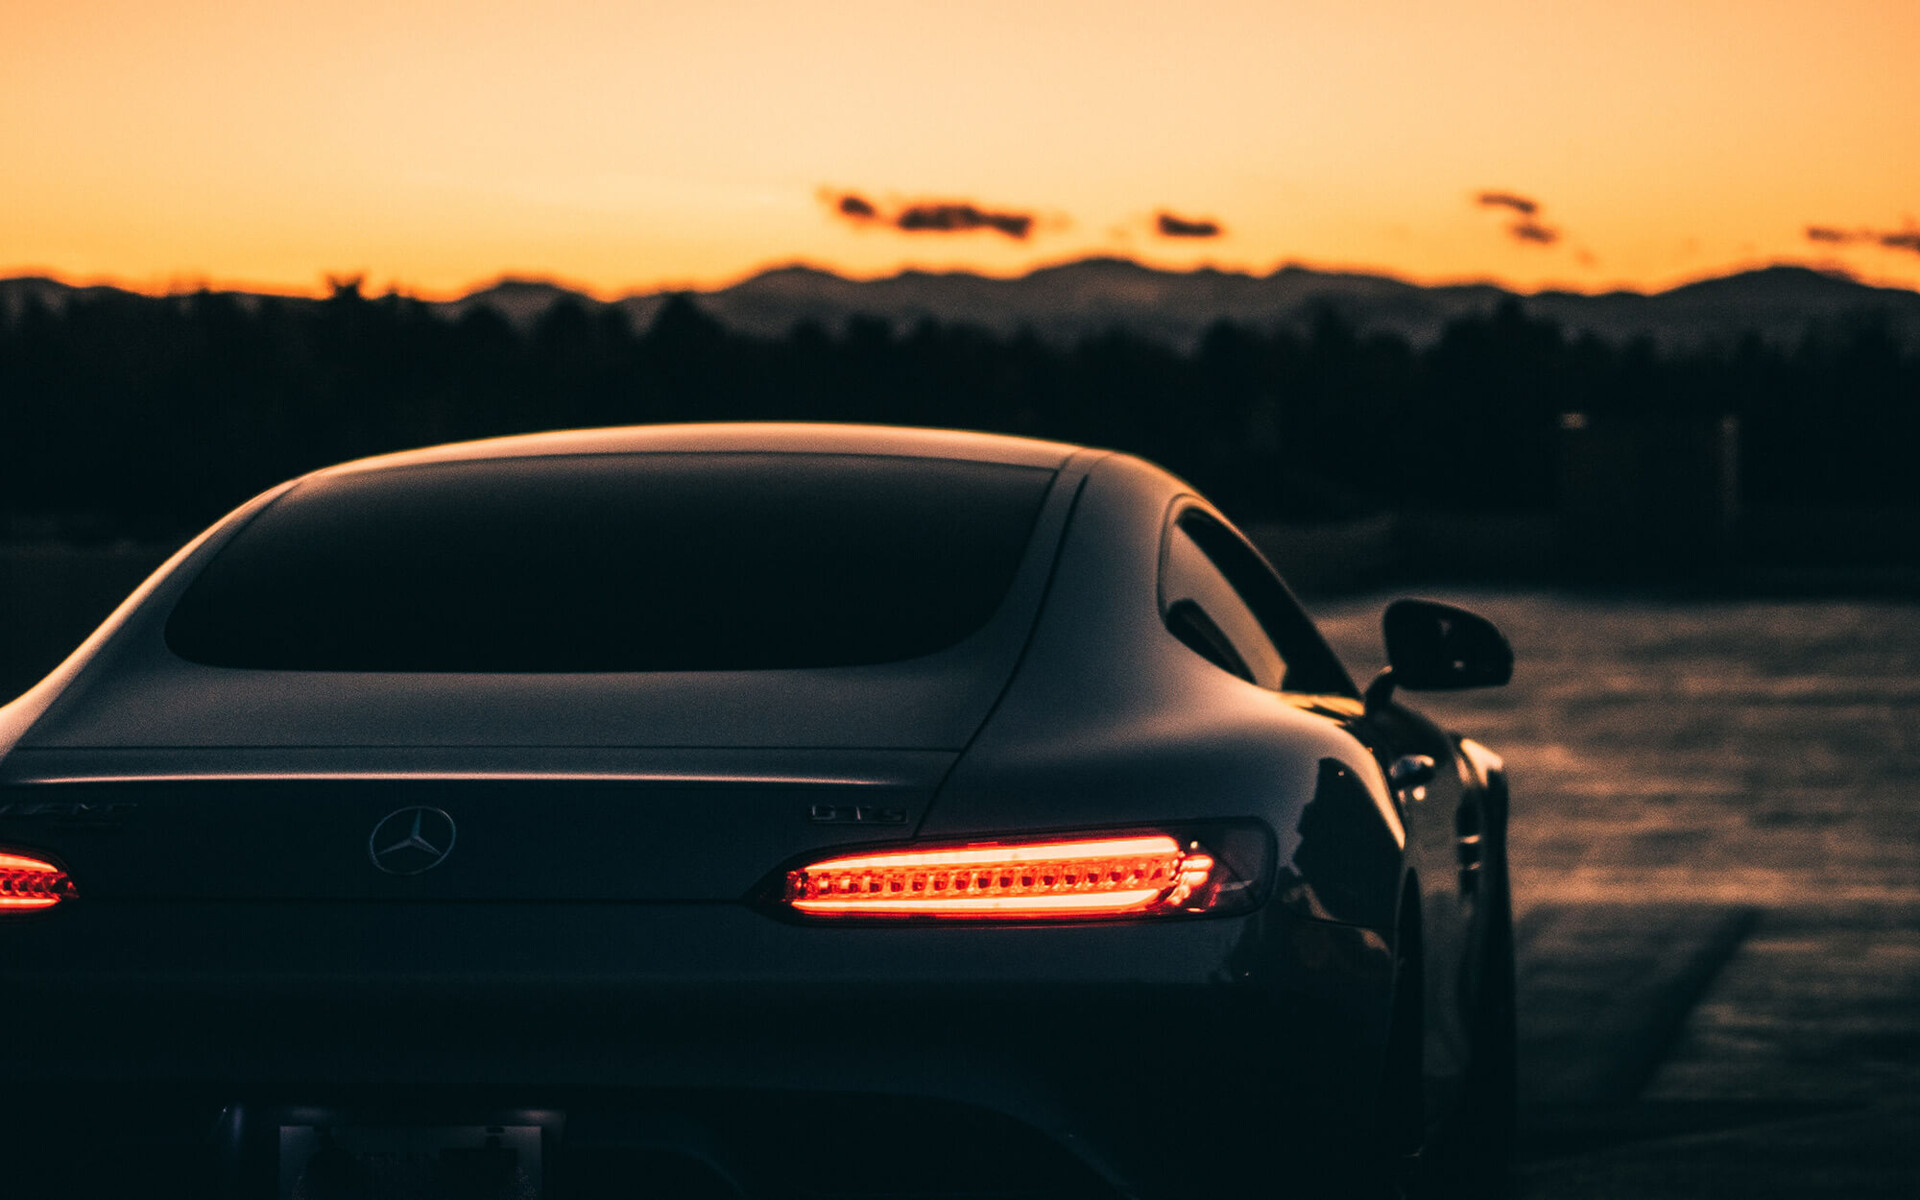 A black car in the sunset